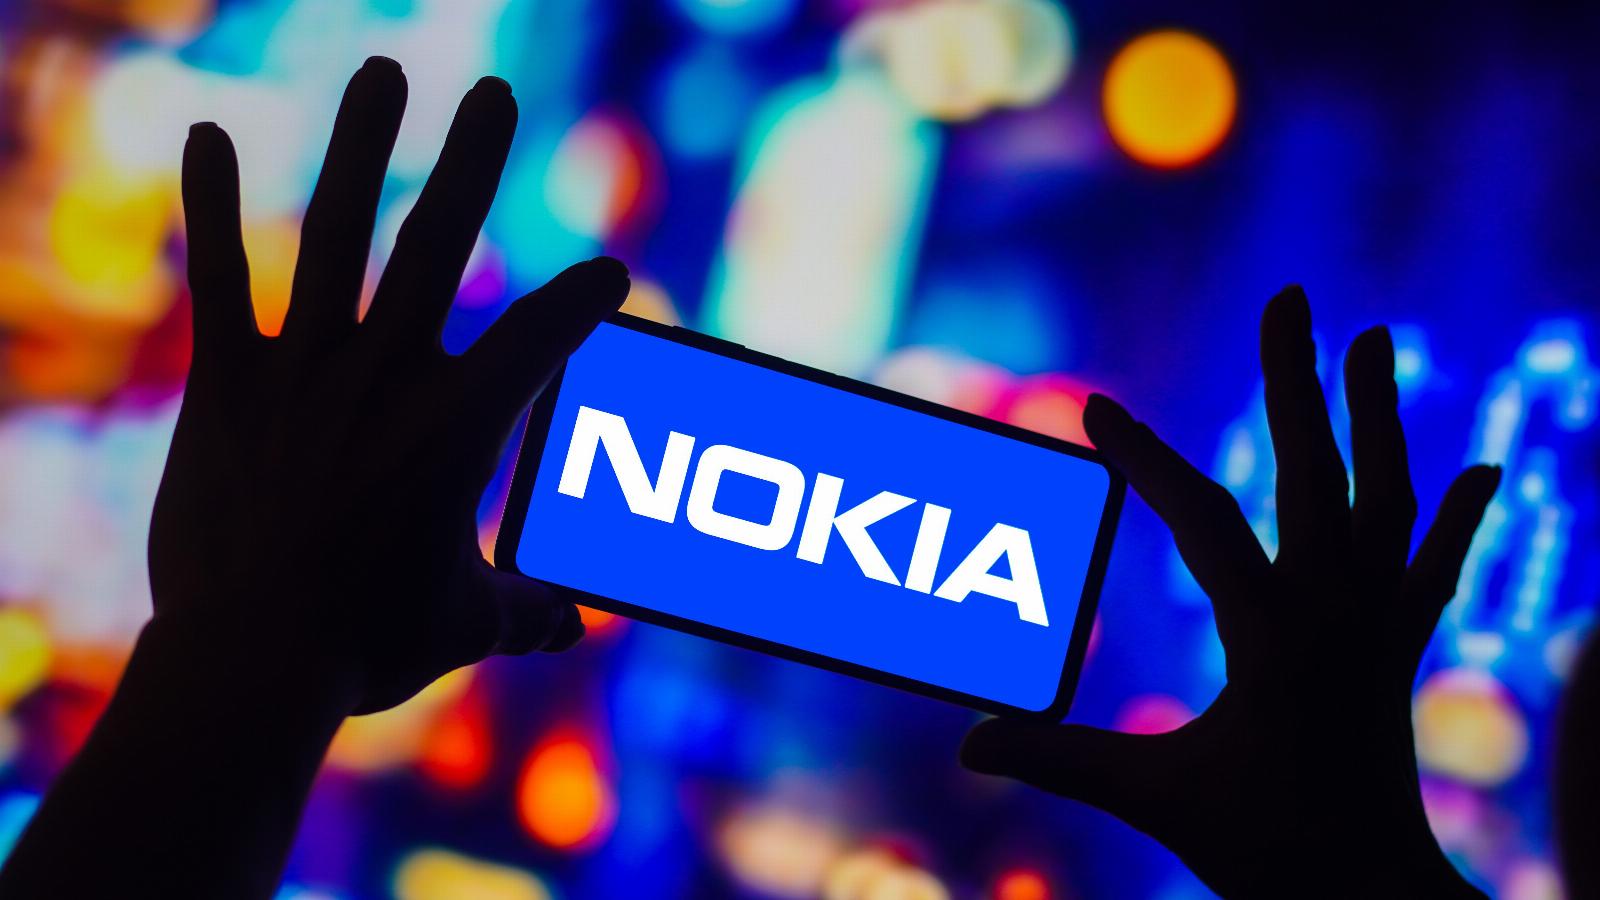 Nokia phonemaker HMD Global to move some manufacturing to Europe